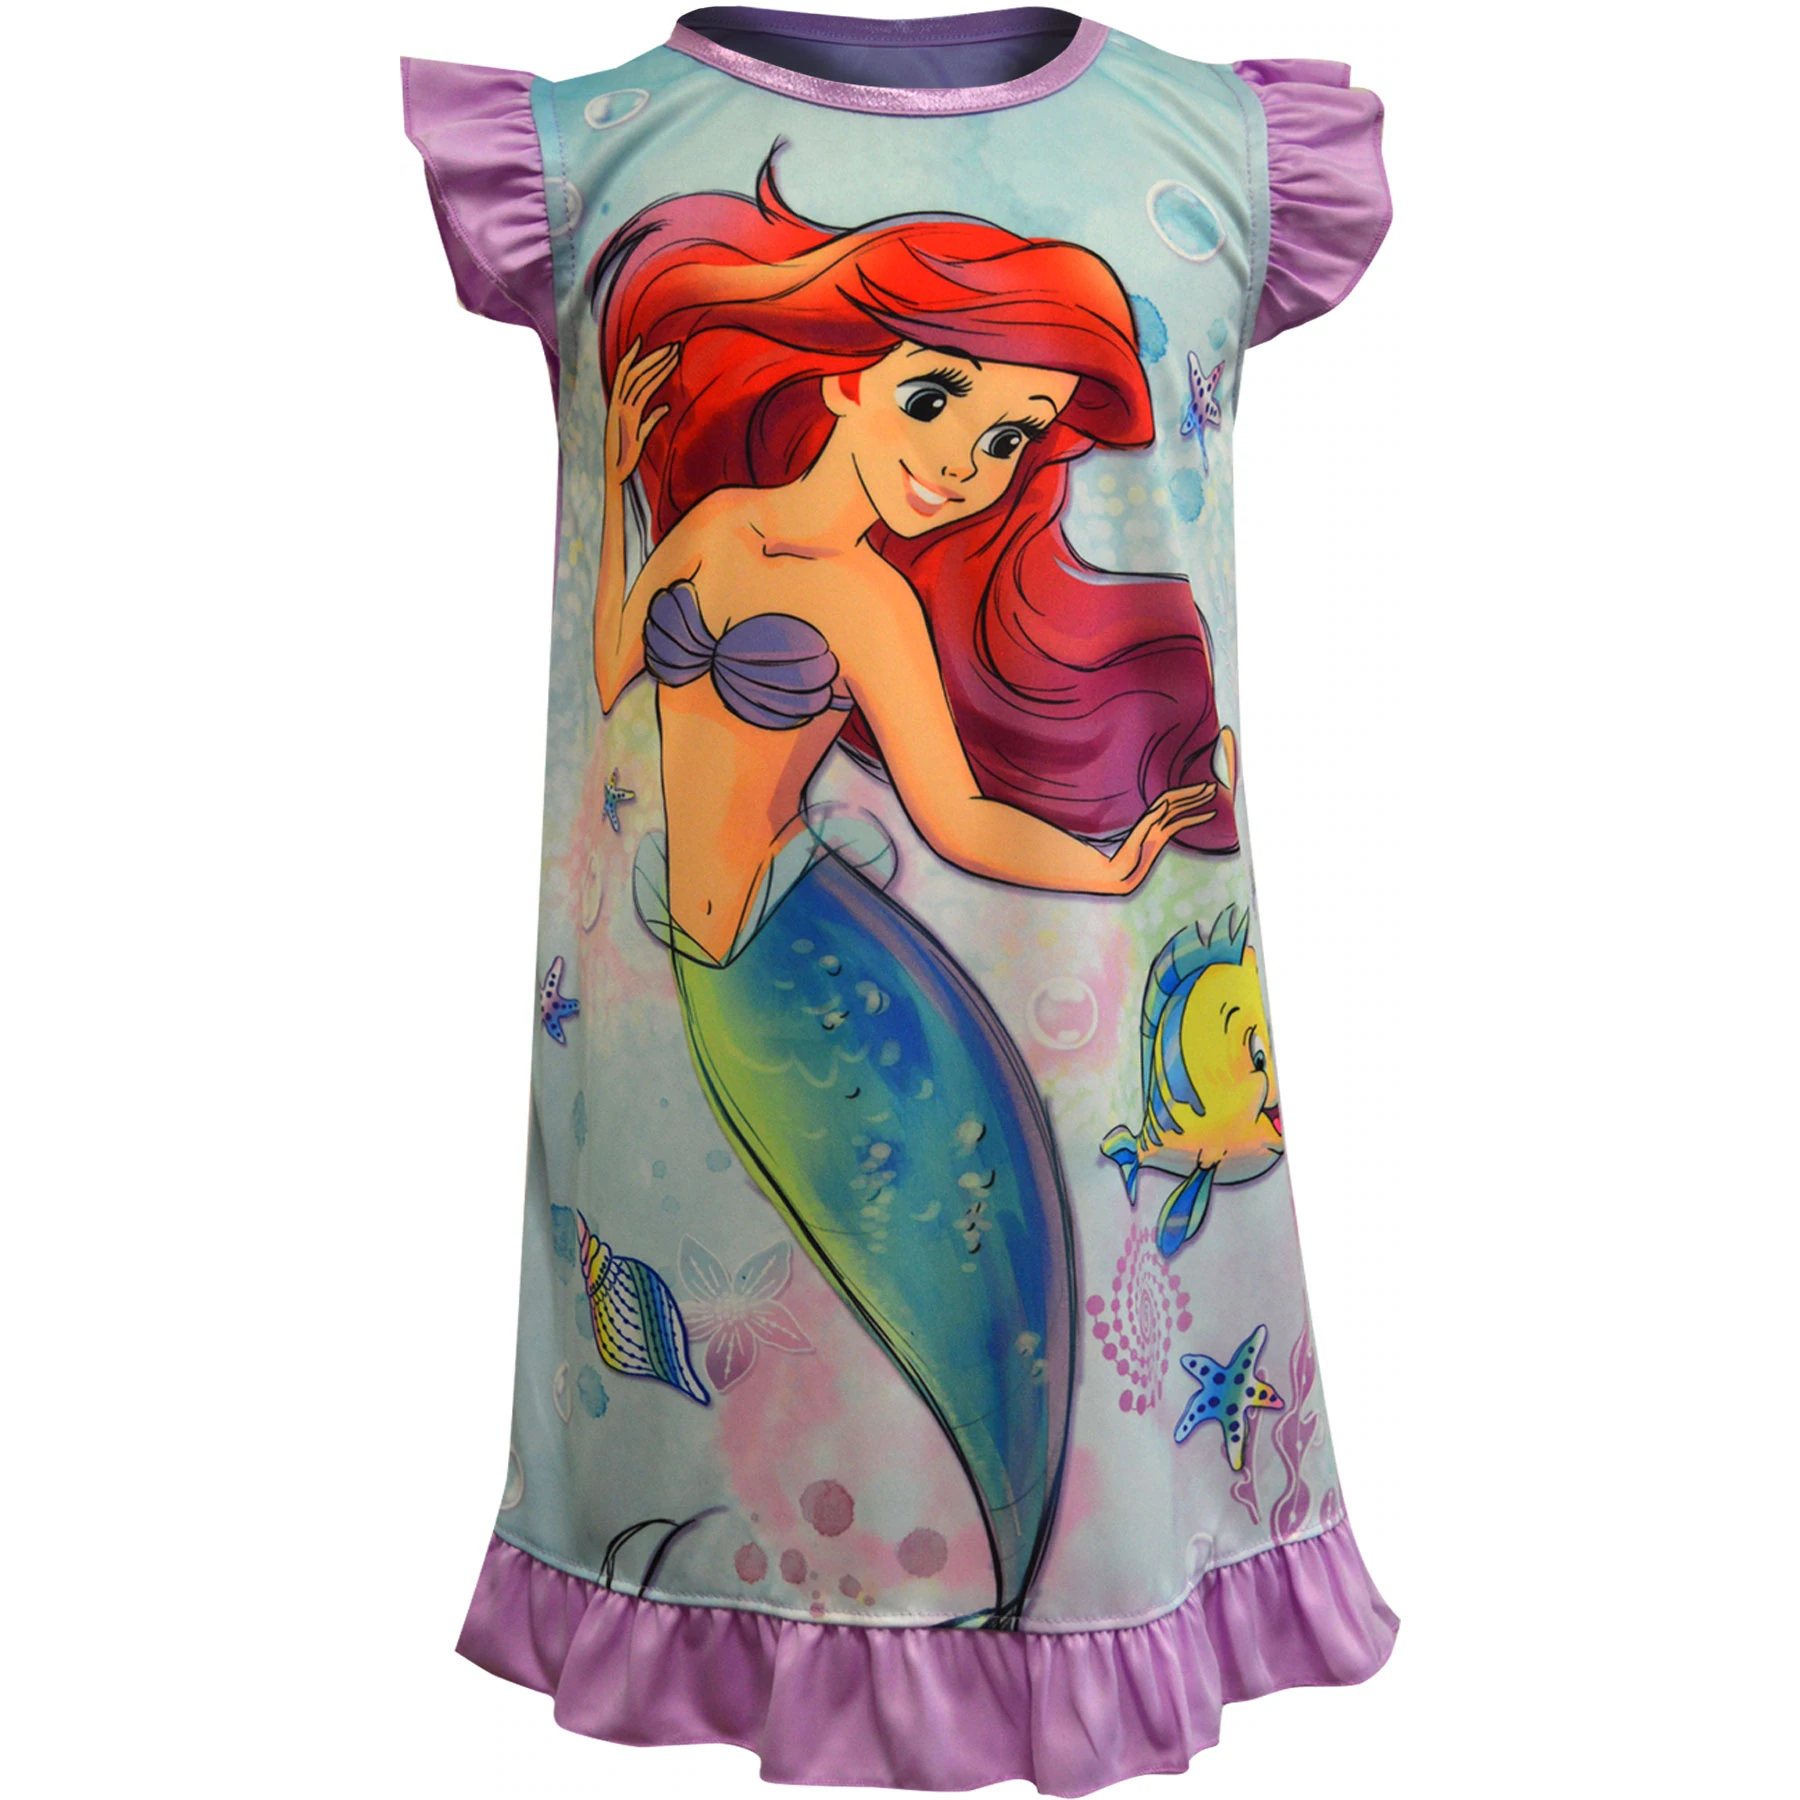 Ariel from the Little Mermaid are one of the most popular nightgowns for girls.